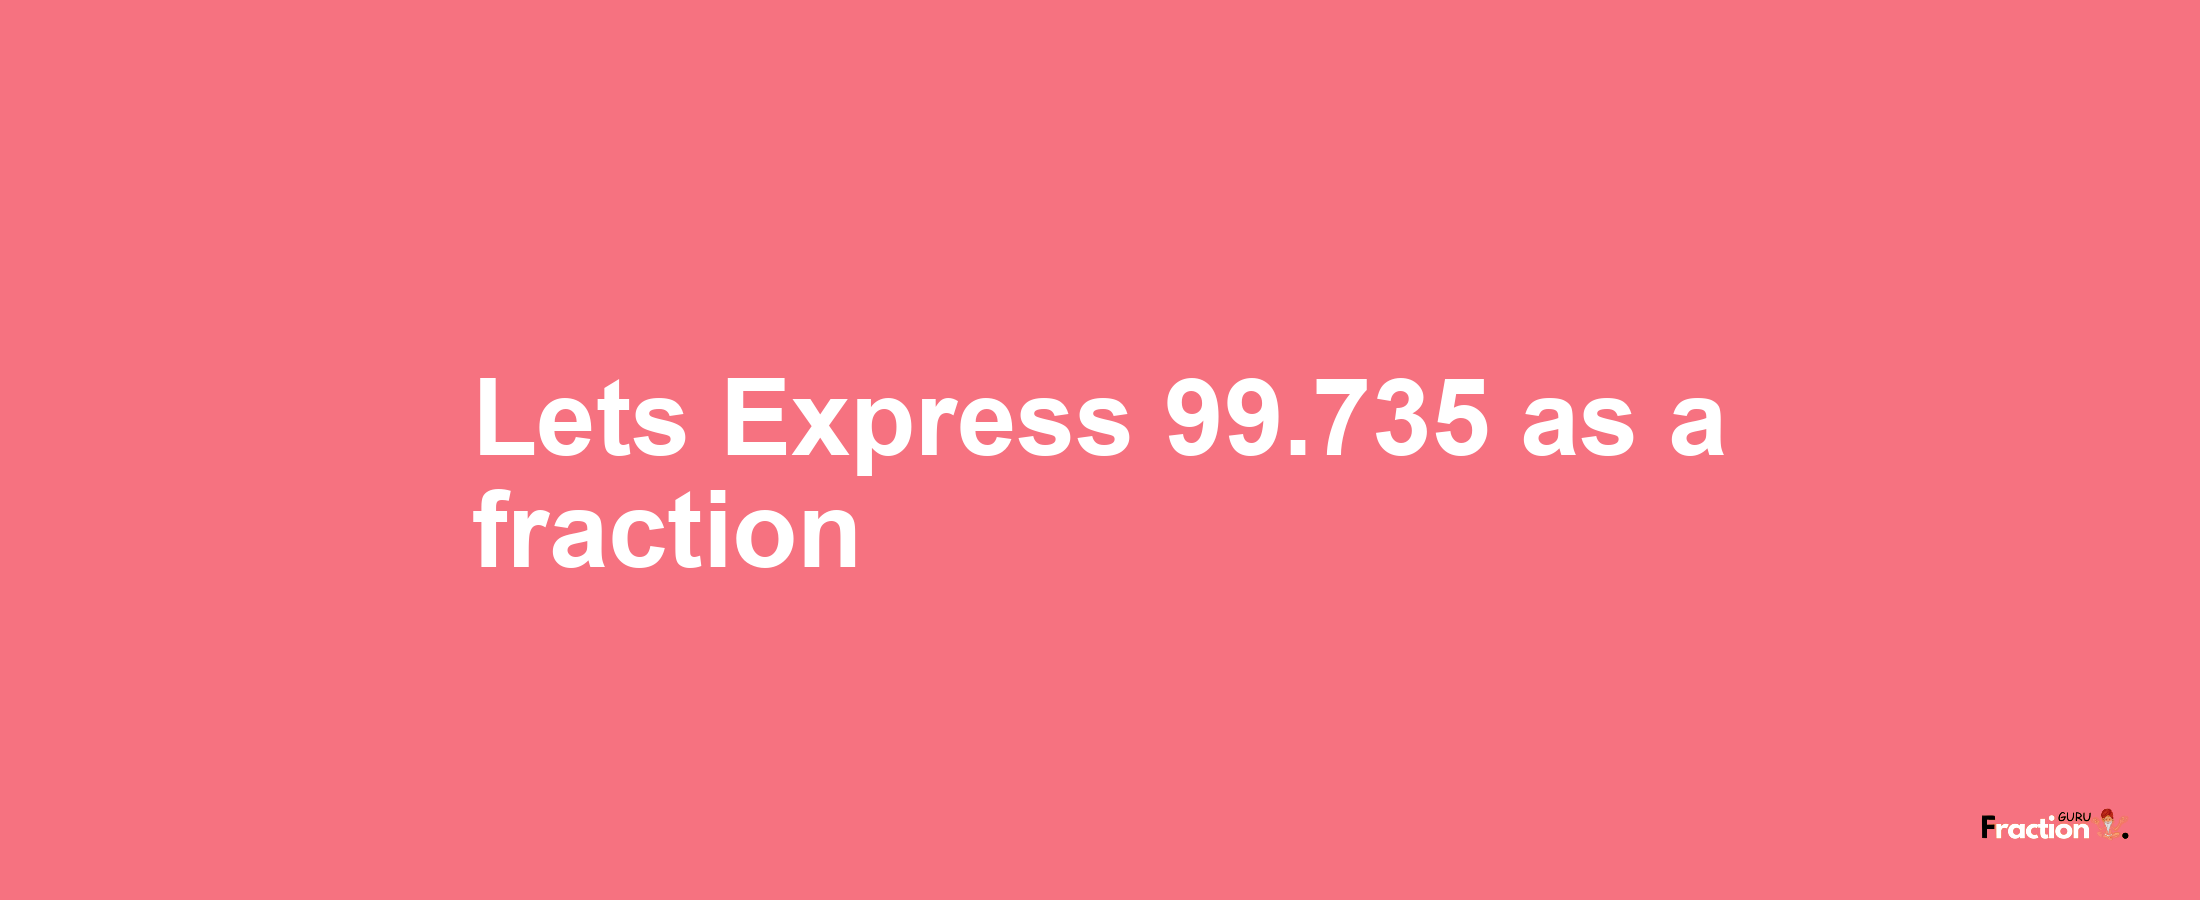 Lets Express 99.735 as afraction